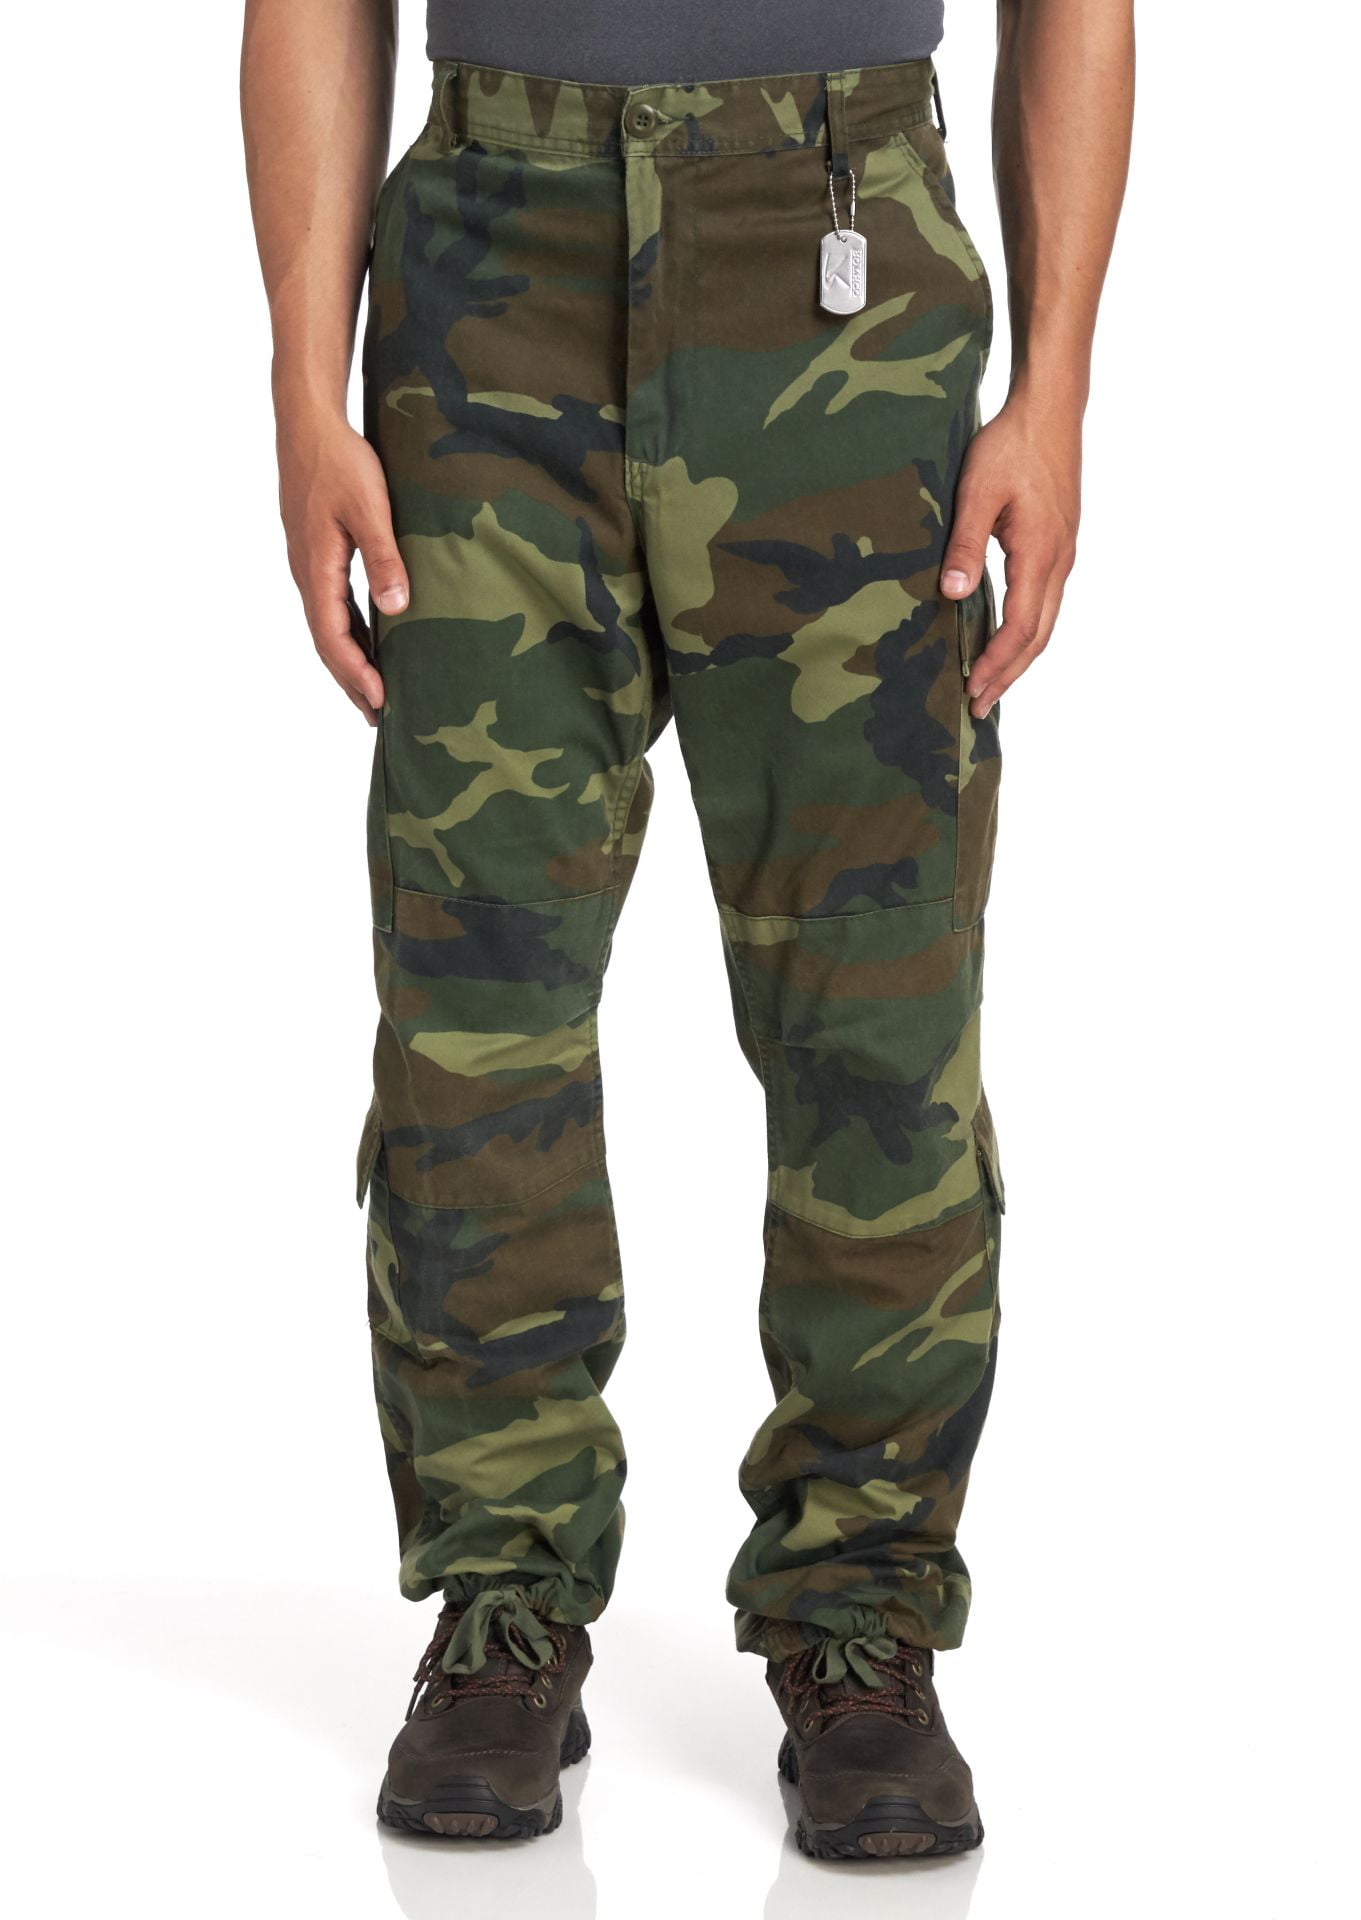 Rothco Men's Camouflage Vintage Paratrooper Cargo Pants - 2XL, Woodland ...